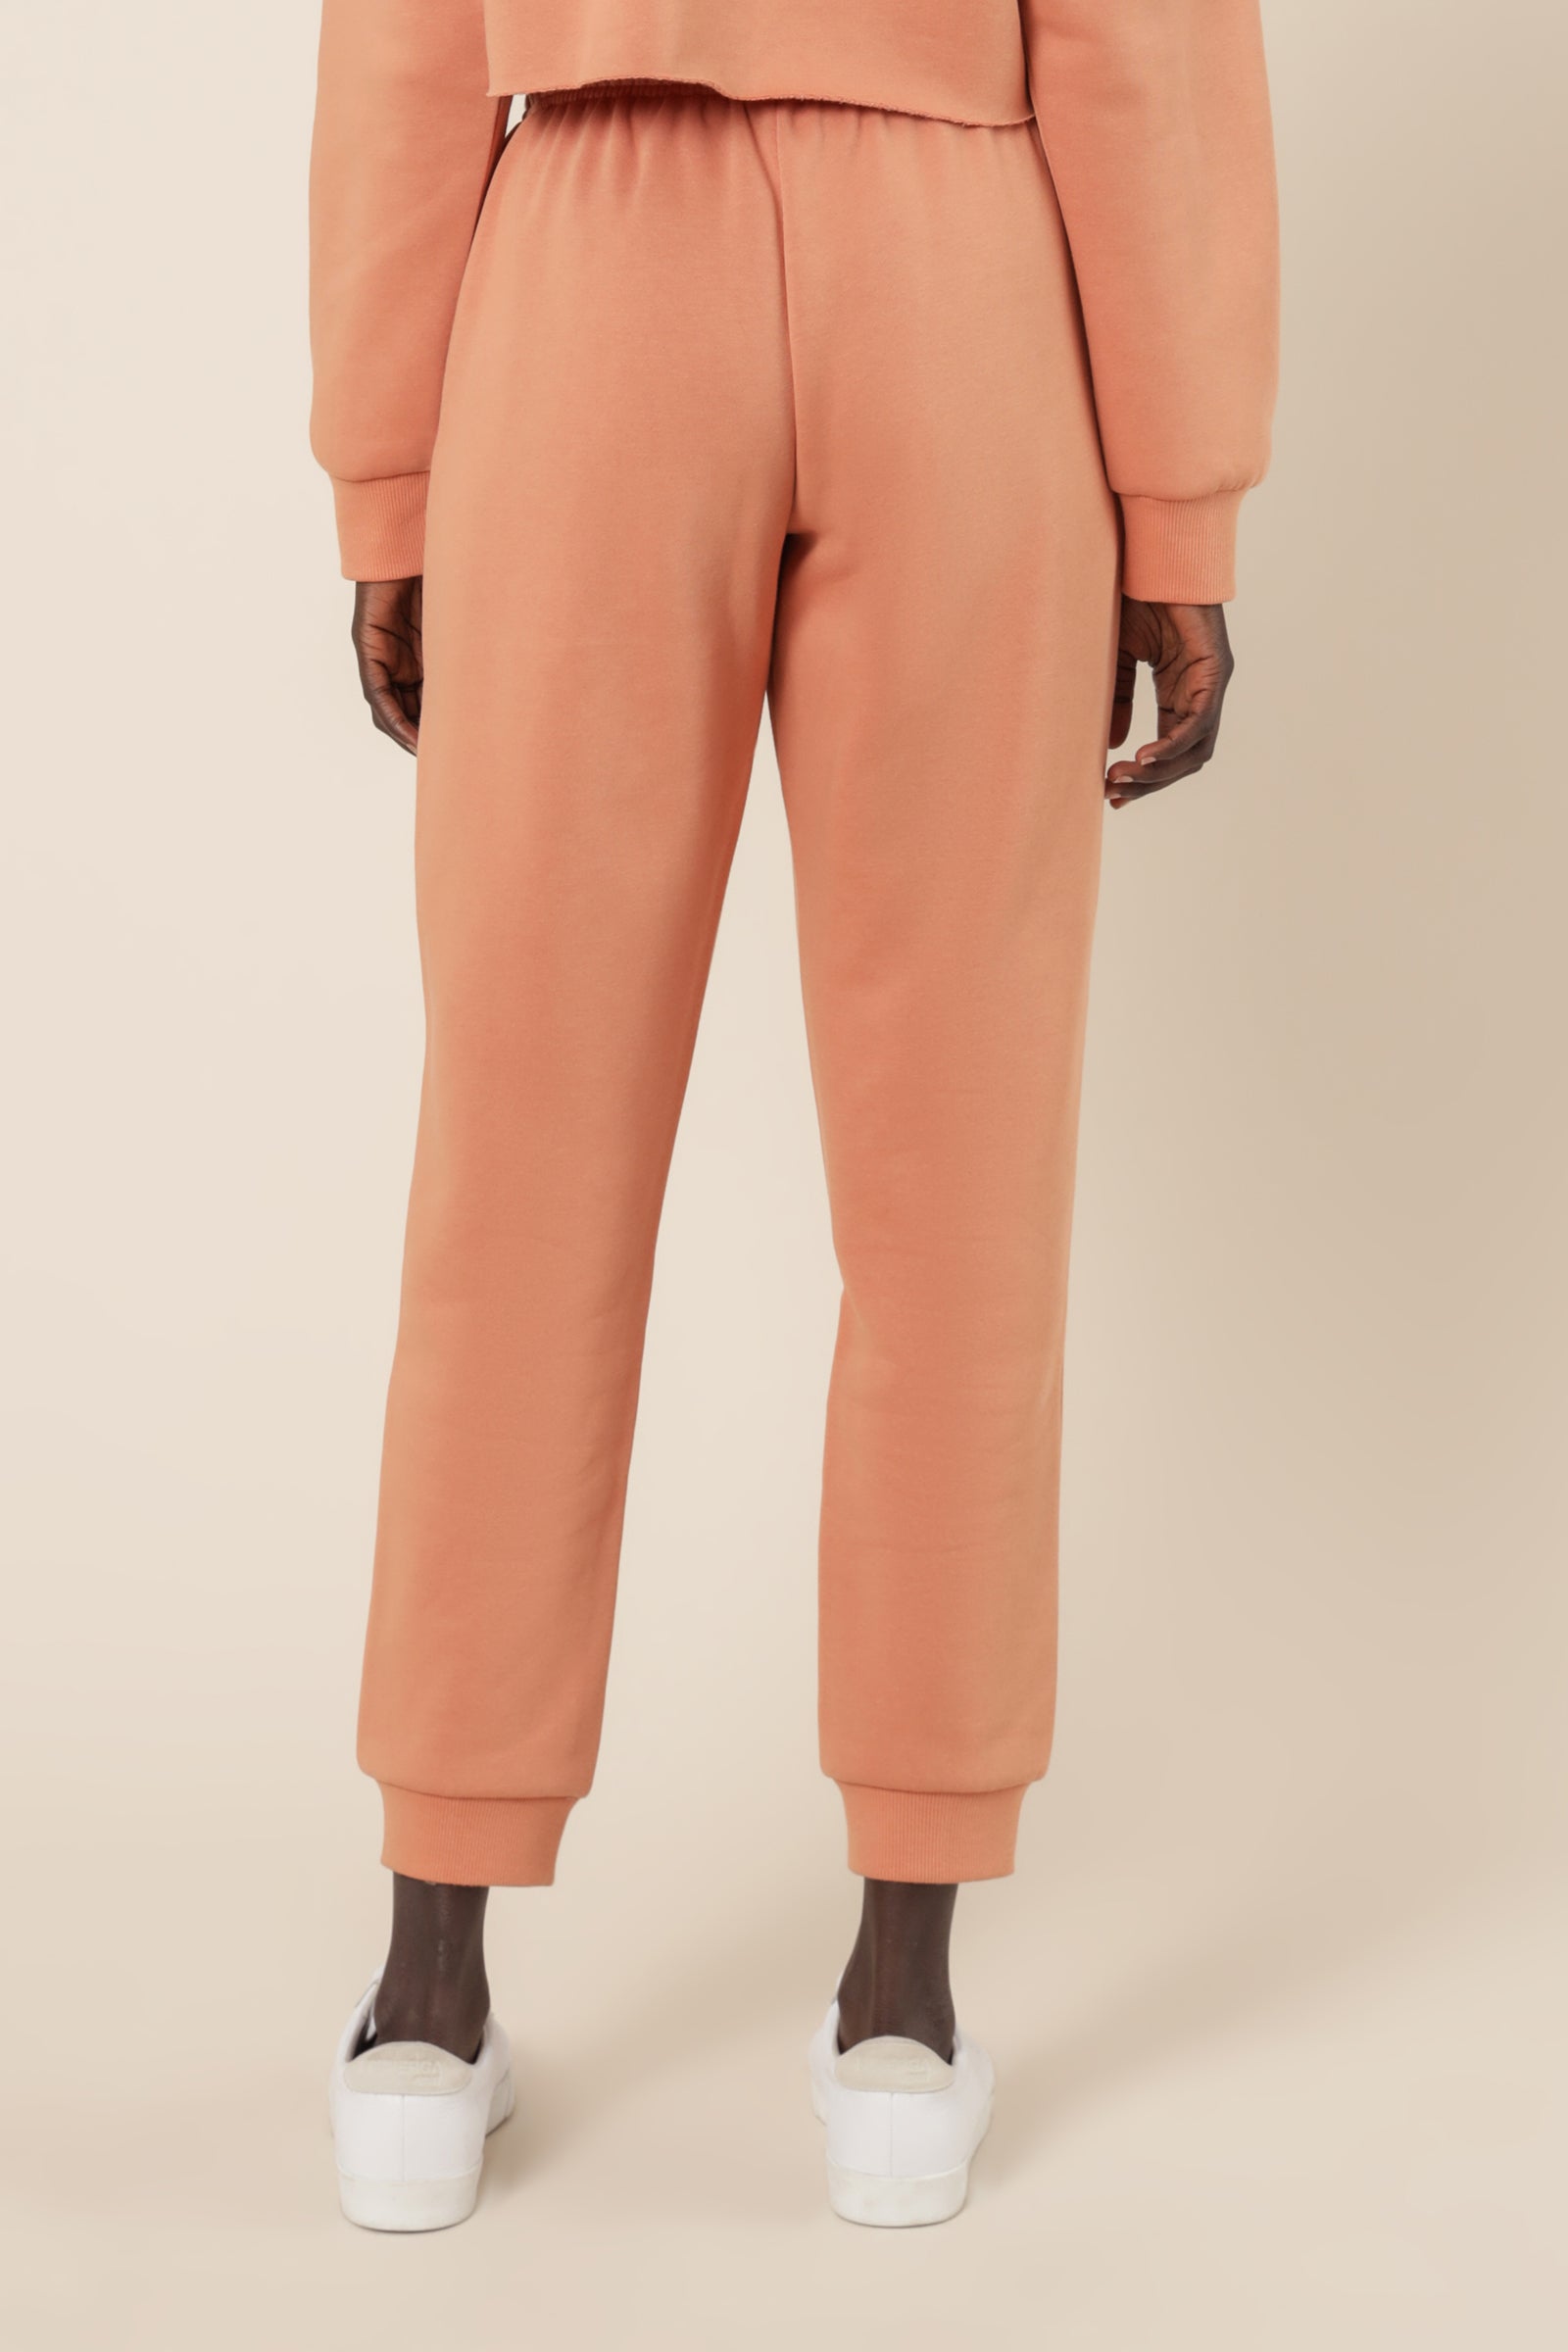 Nude Lucy Carter Classic Trackpant Terracotta Pants 